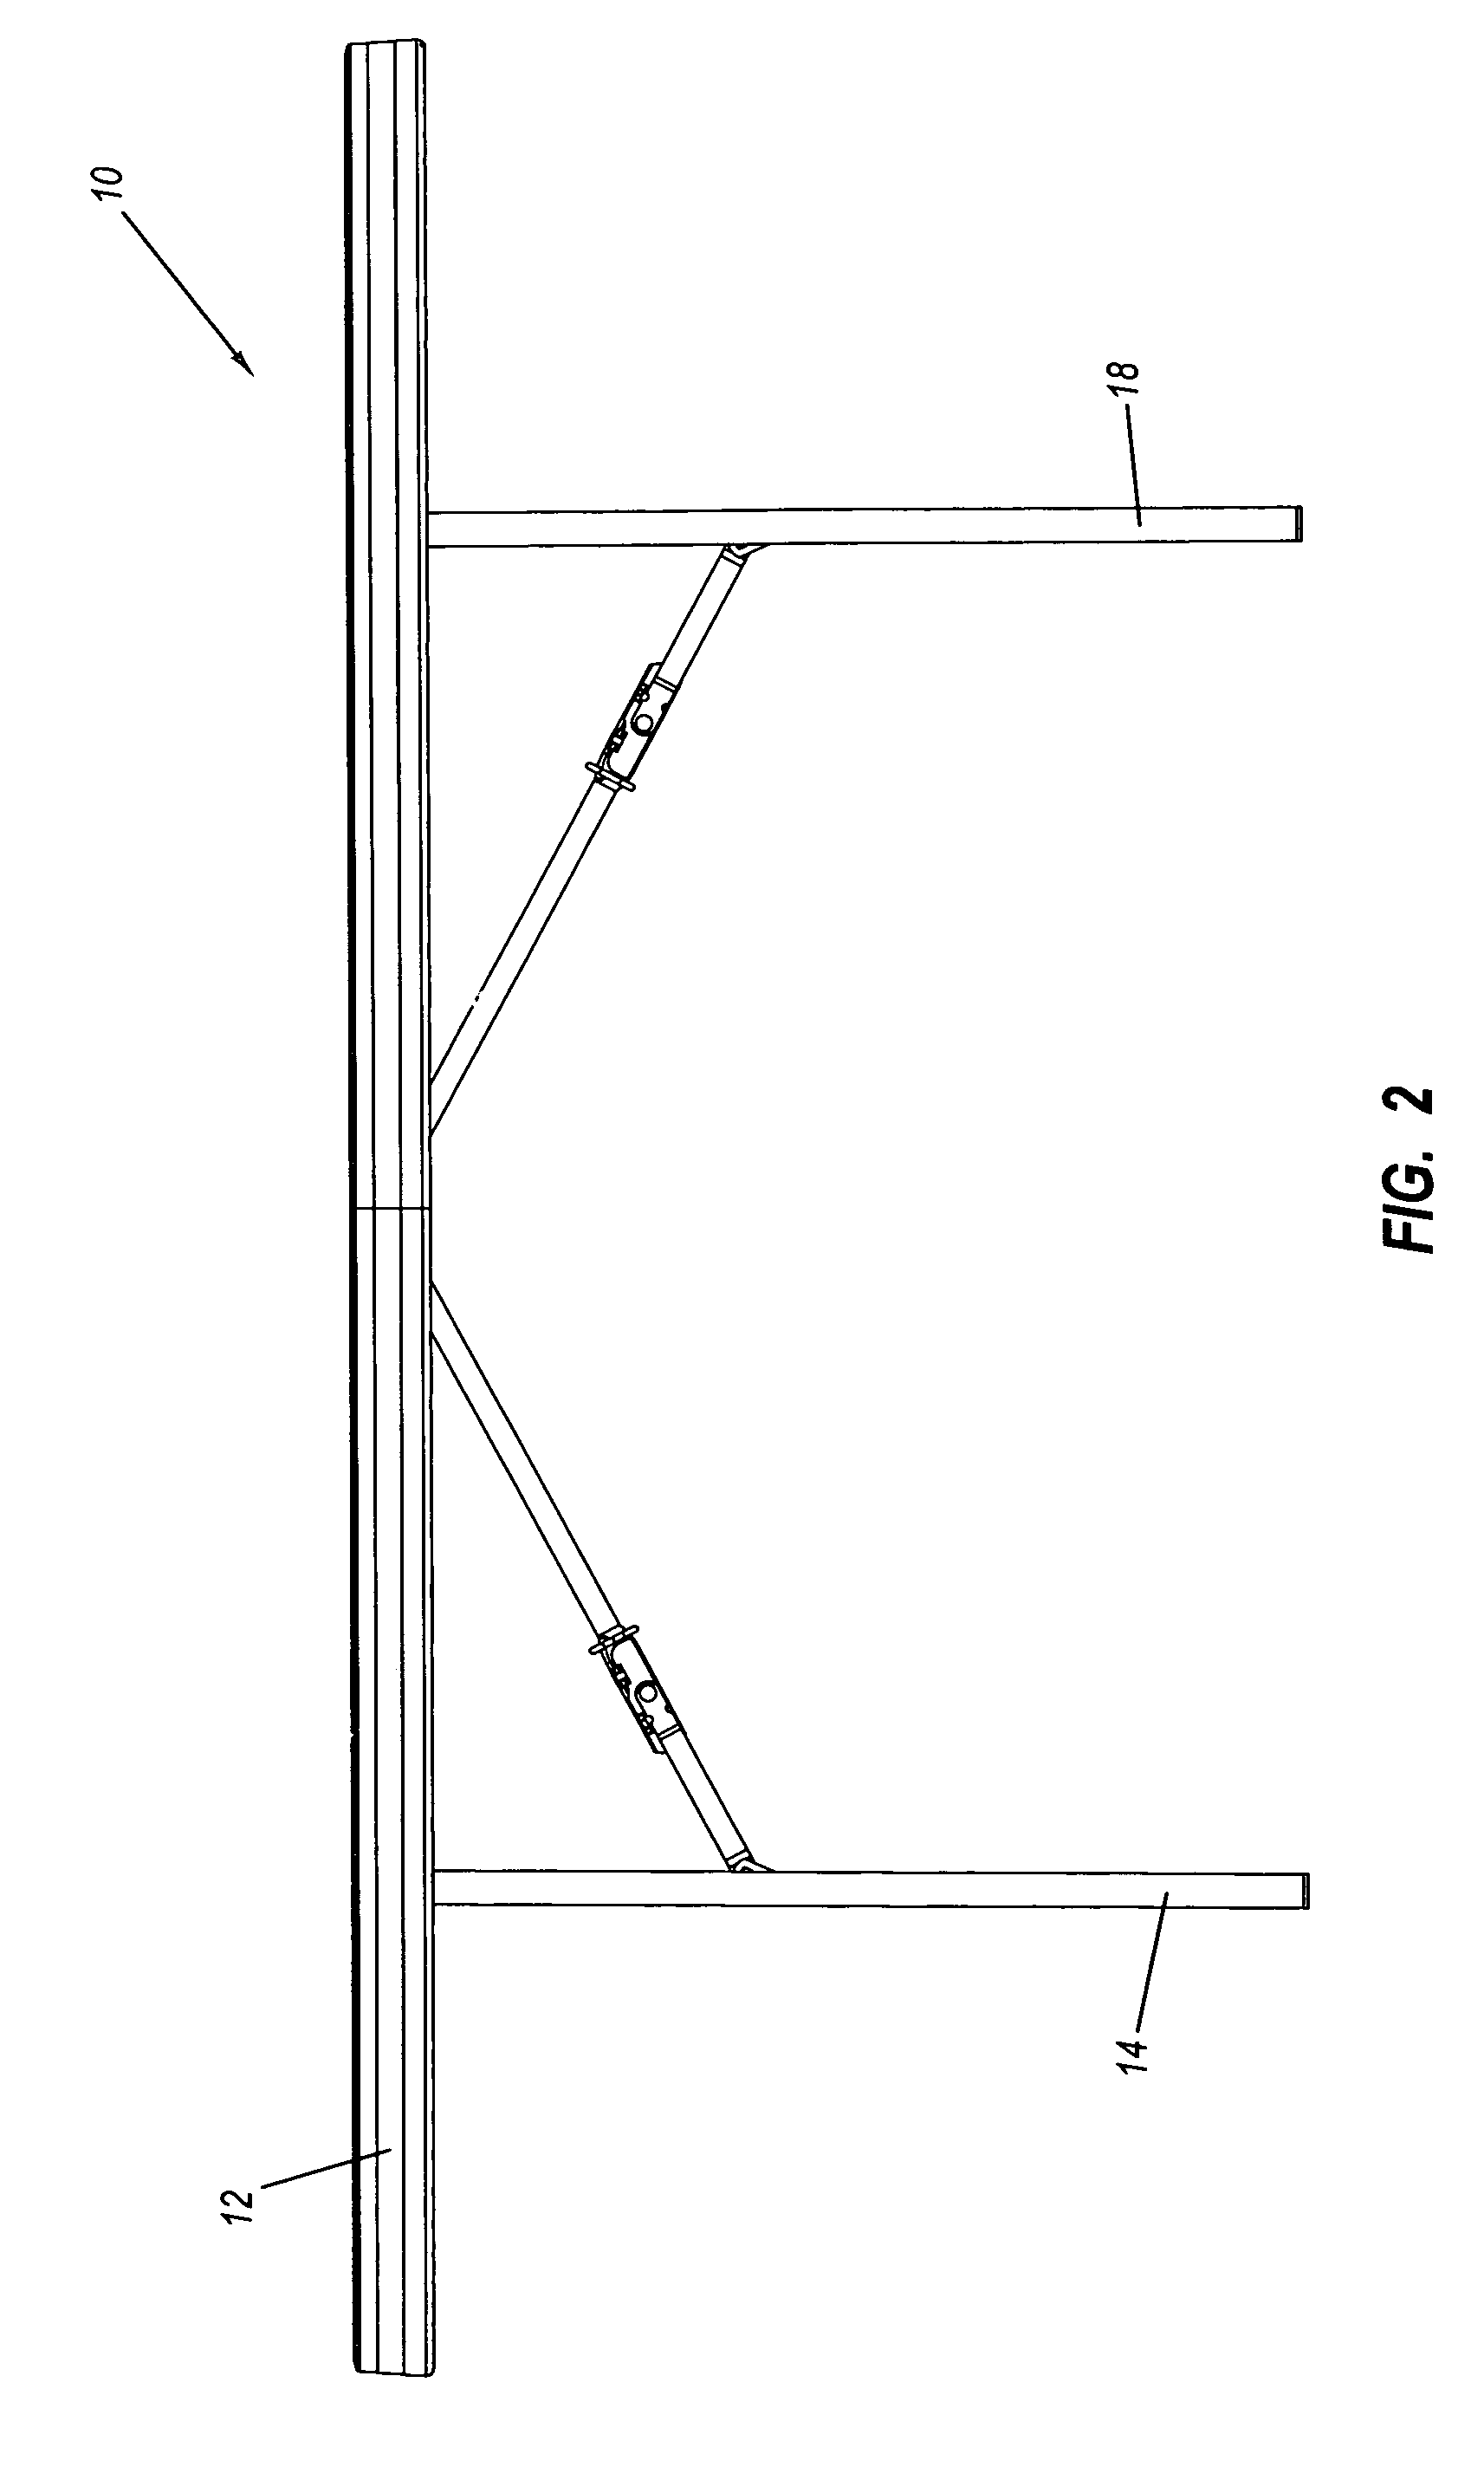 Table with edge support structures